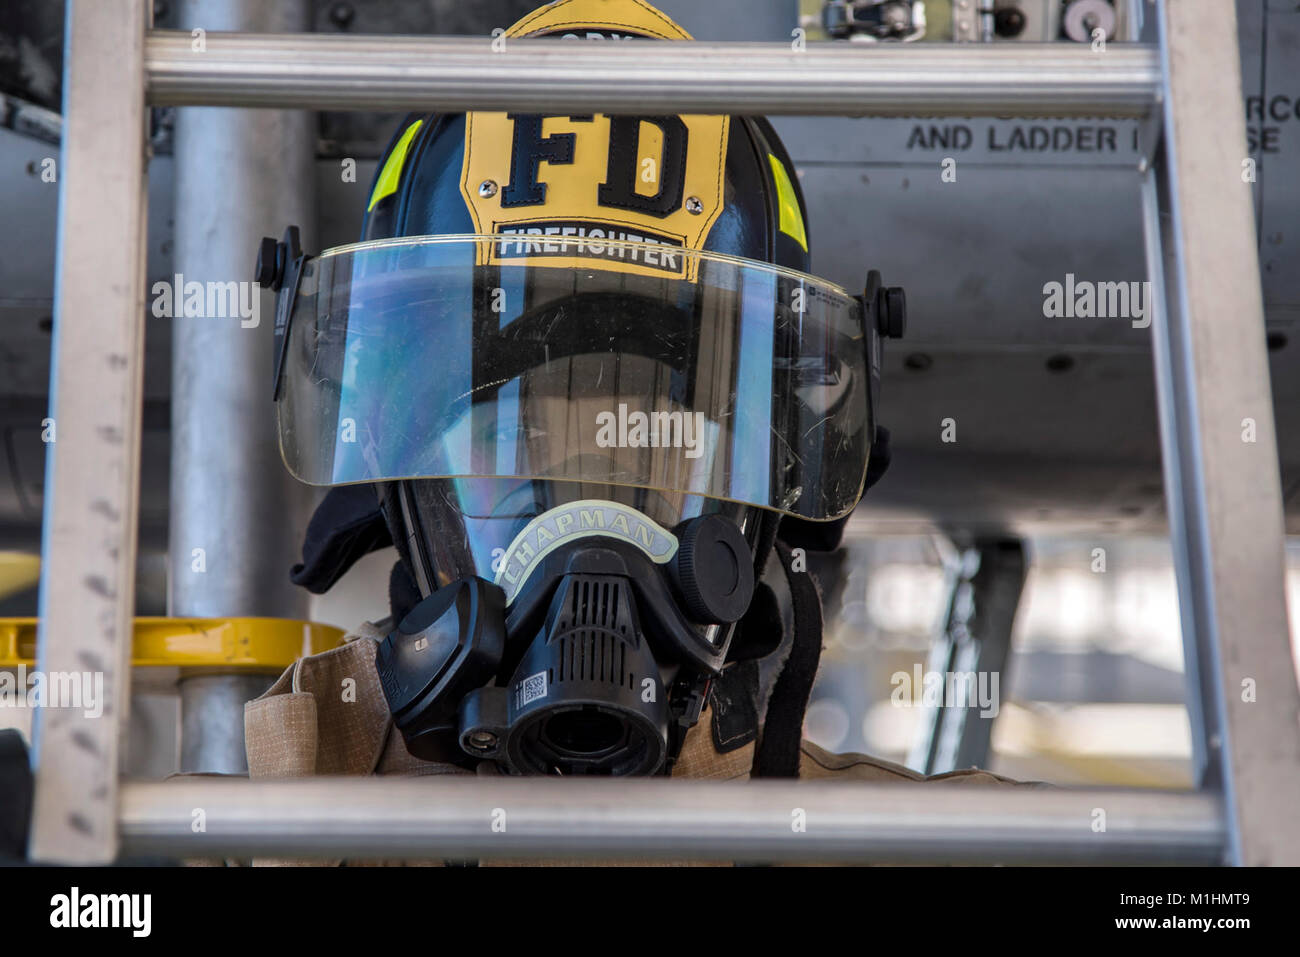 Airman 1st Class Orlando Chapman, 23d Civil Engineer Squadron (CES) firefighter, holds a ladder during extraction training, Jan. 25, 2018, at Moody Air Force Base, Ga. Firefighters from the 23d CES conducted A-10C Thunderbolt II extraction training to practice extinguishing an aircraft fire and quickly rescuing a pilot from an A-10. The 23d CES holds the extraction training twice annually and are evaluated on the amount of time it takes them to rescue a pilot from the cockpit. (U.S. Air Force Stock Photo